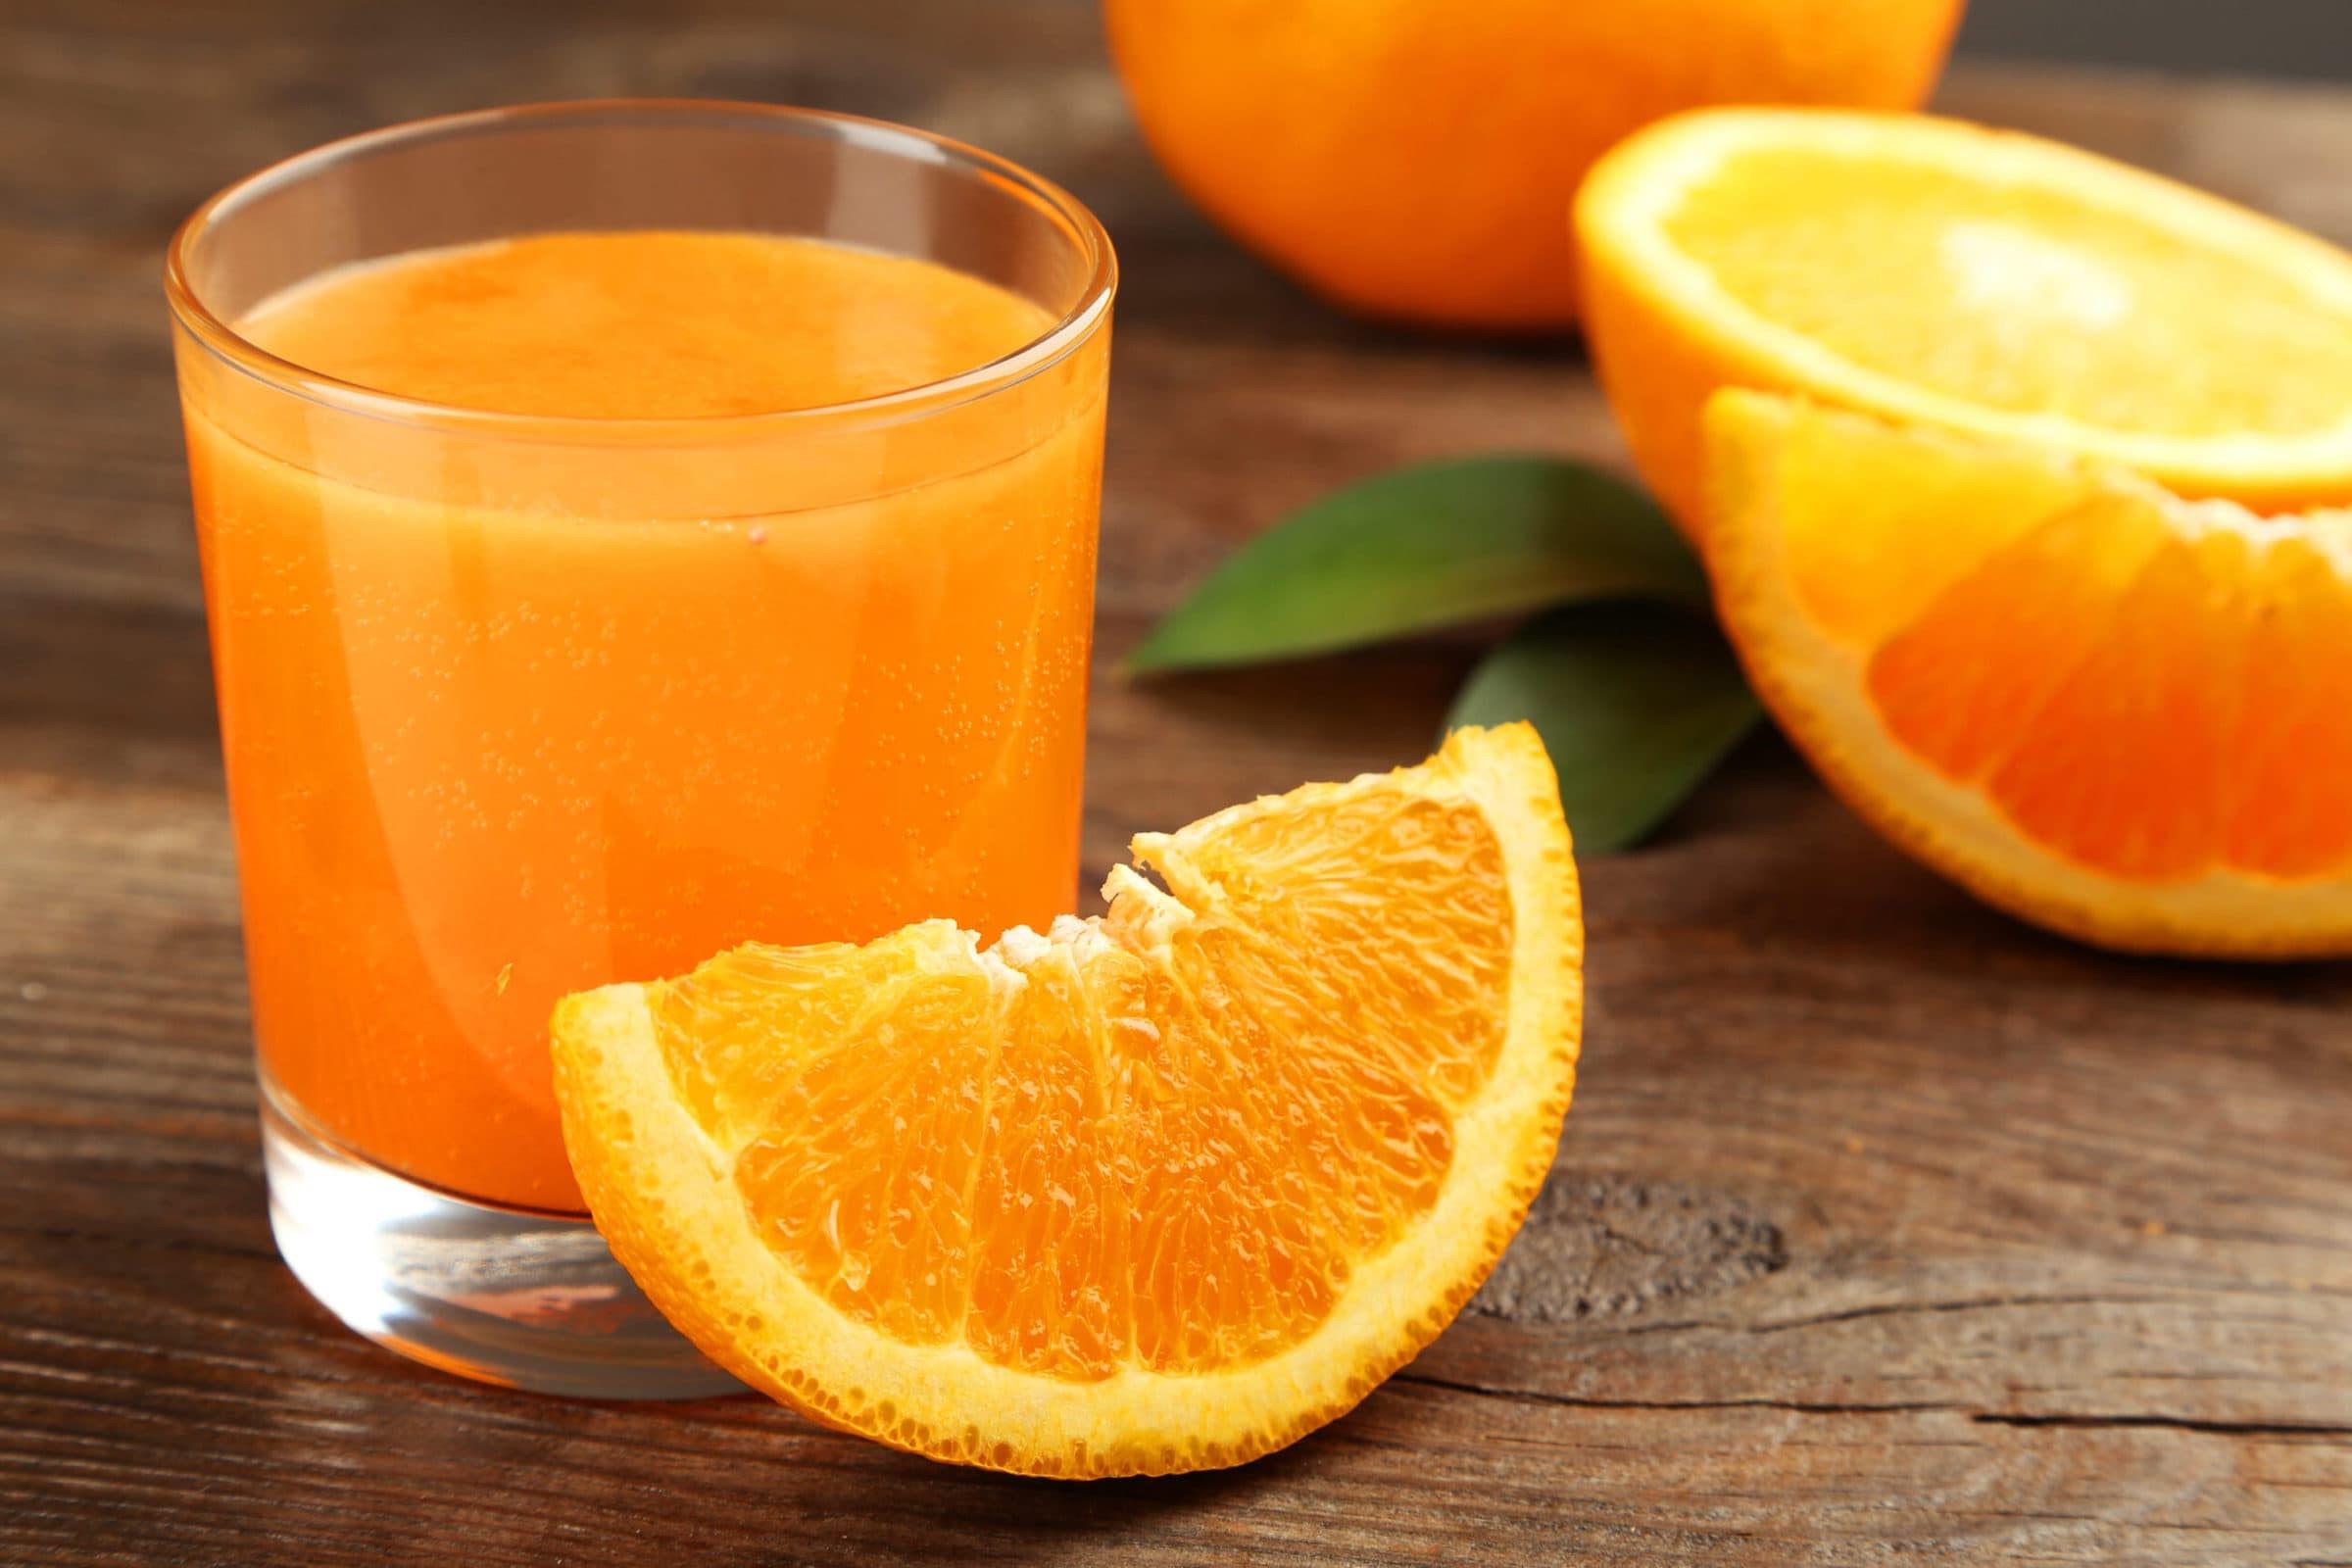 13-facts-about-national-orange-juice-day-may-4th